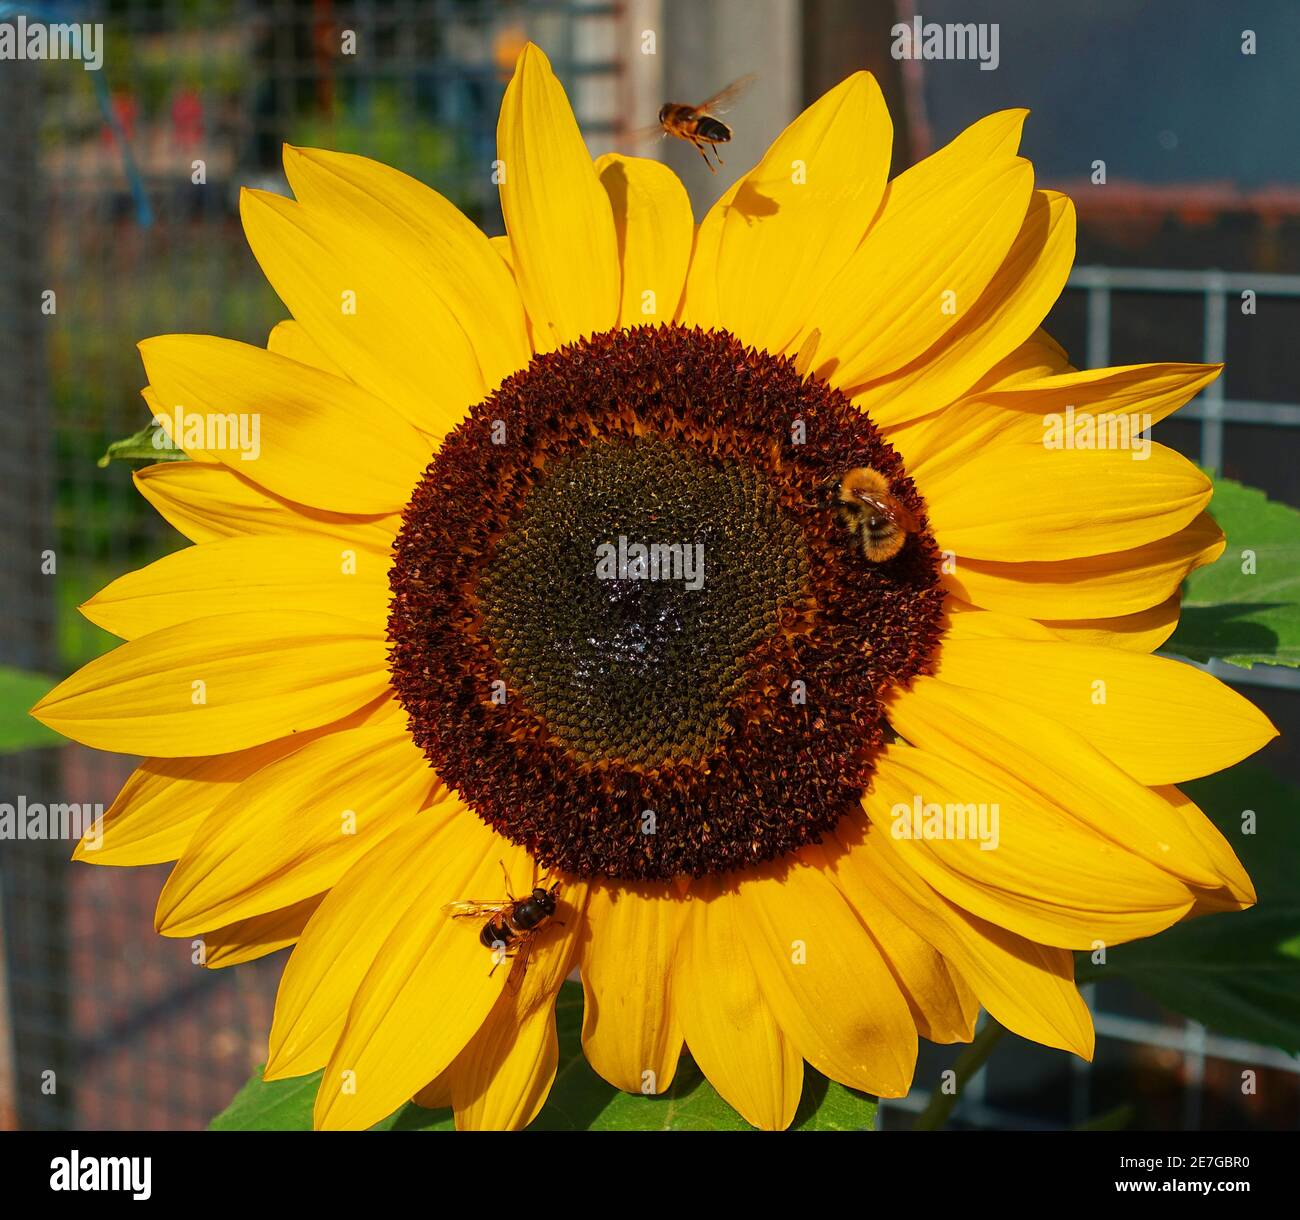 Sunflower with bees Stock Photo